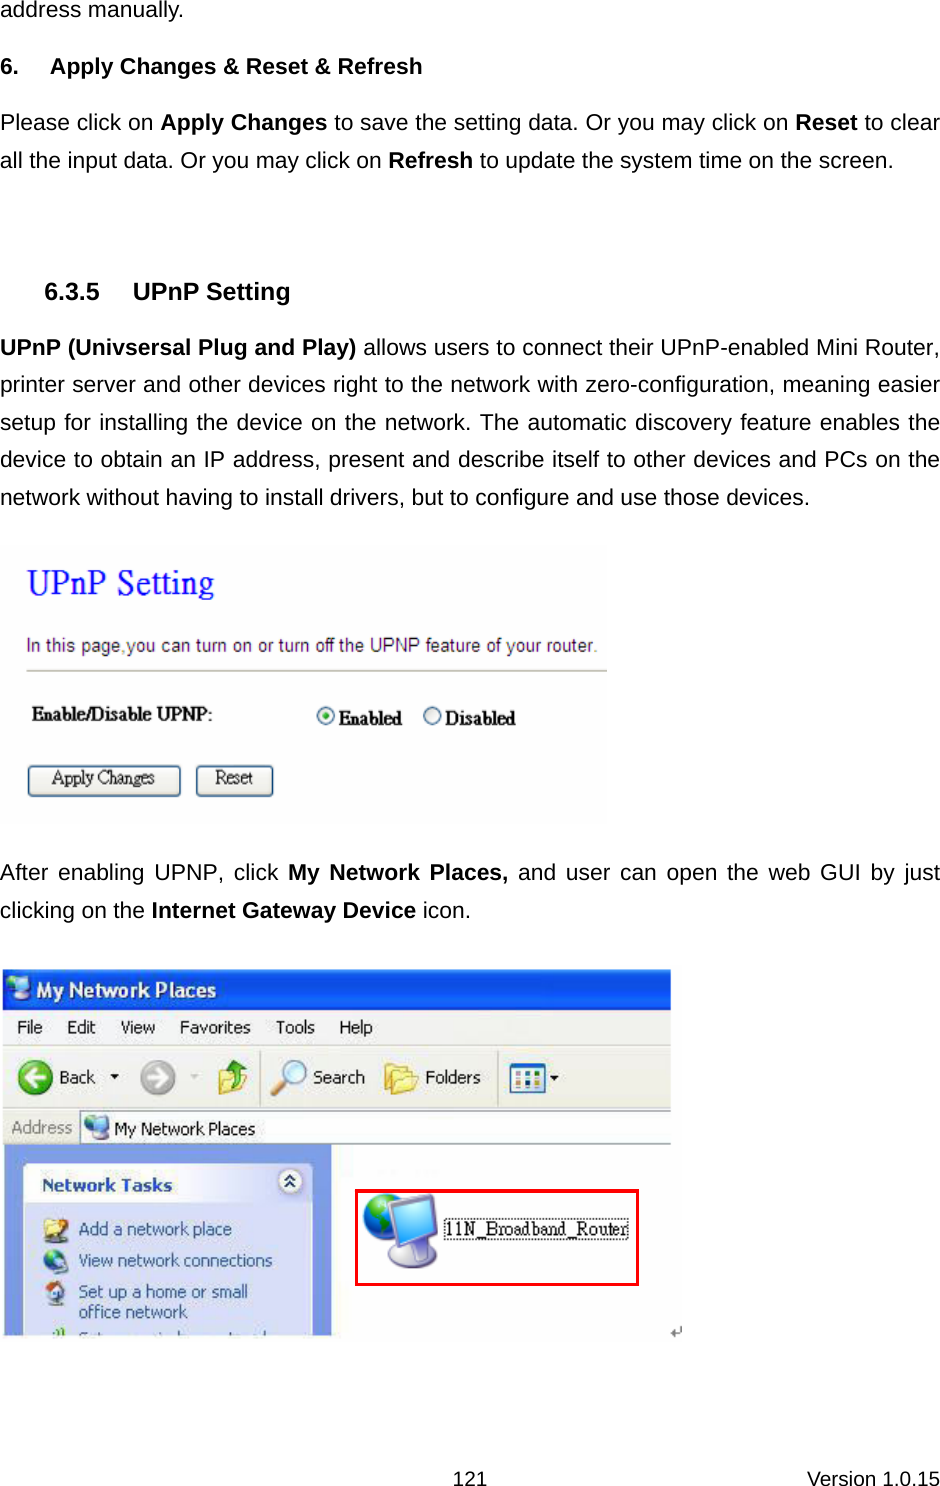 Version 1.0.15 121address manually. 6.  Apply Changes &amp; Reset &amp; Refresh Please click on Apply Changes to save the setting data. Or you may click on Reset to clear all the input data. Or you may click on Refresh to update the system time on the screen.  6.3.5 UPnP Setting UPnP (Univsersal Plug and Play) allows users to connect their UPnP-enabled Mini Router, printer server and other devices right to the network with zero-configuration, meaning easier setup for installing the device on the network. The automatic discovery feature enables the device to obtain an IP address, present and describe itself to other devices and PCs on the network without having to install drivers, but to configure and use those devices.    After enabling UPNP, click My Network Places, and user can open the web GUI by just clicking on the Internet Gateway Device icon.    